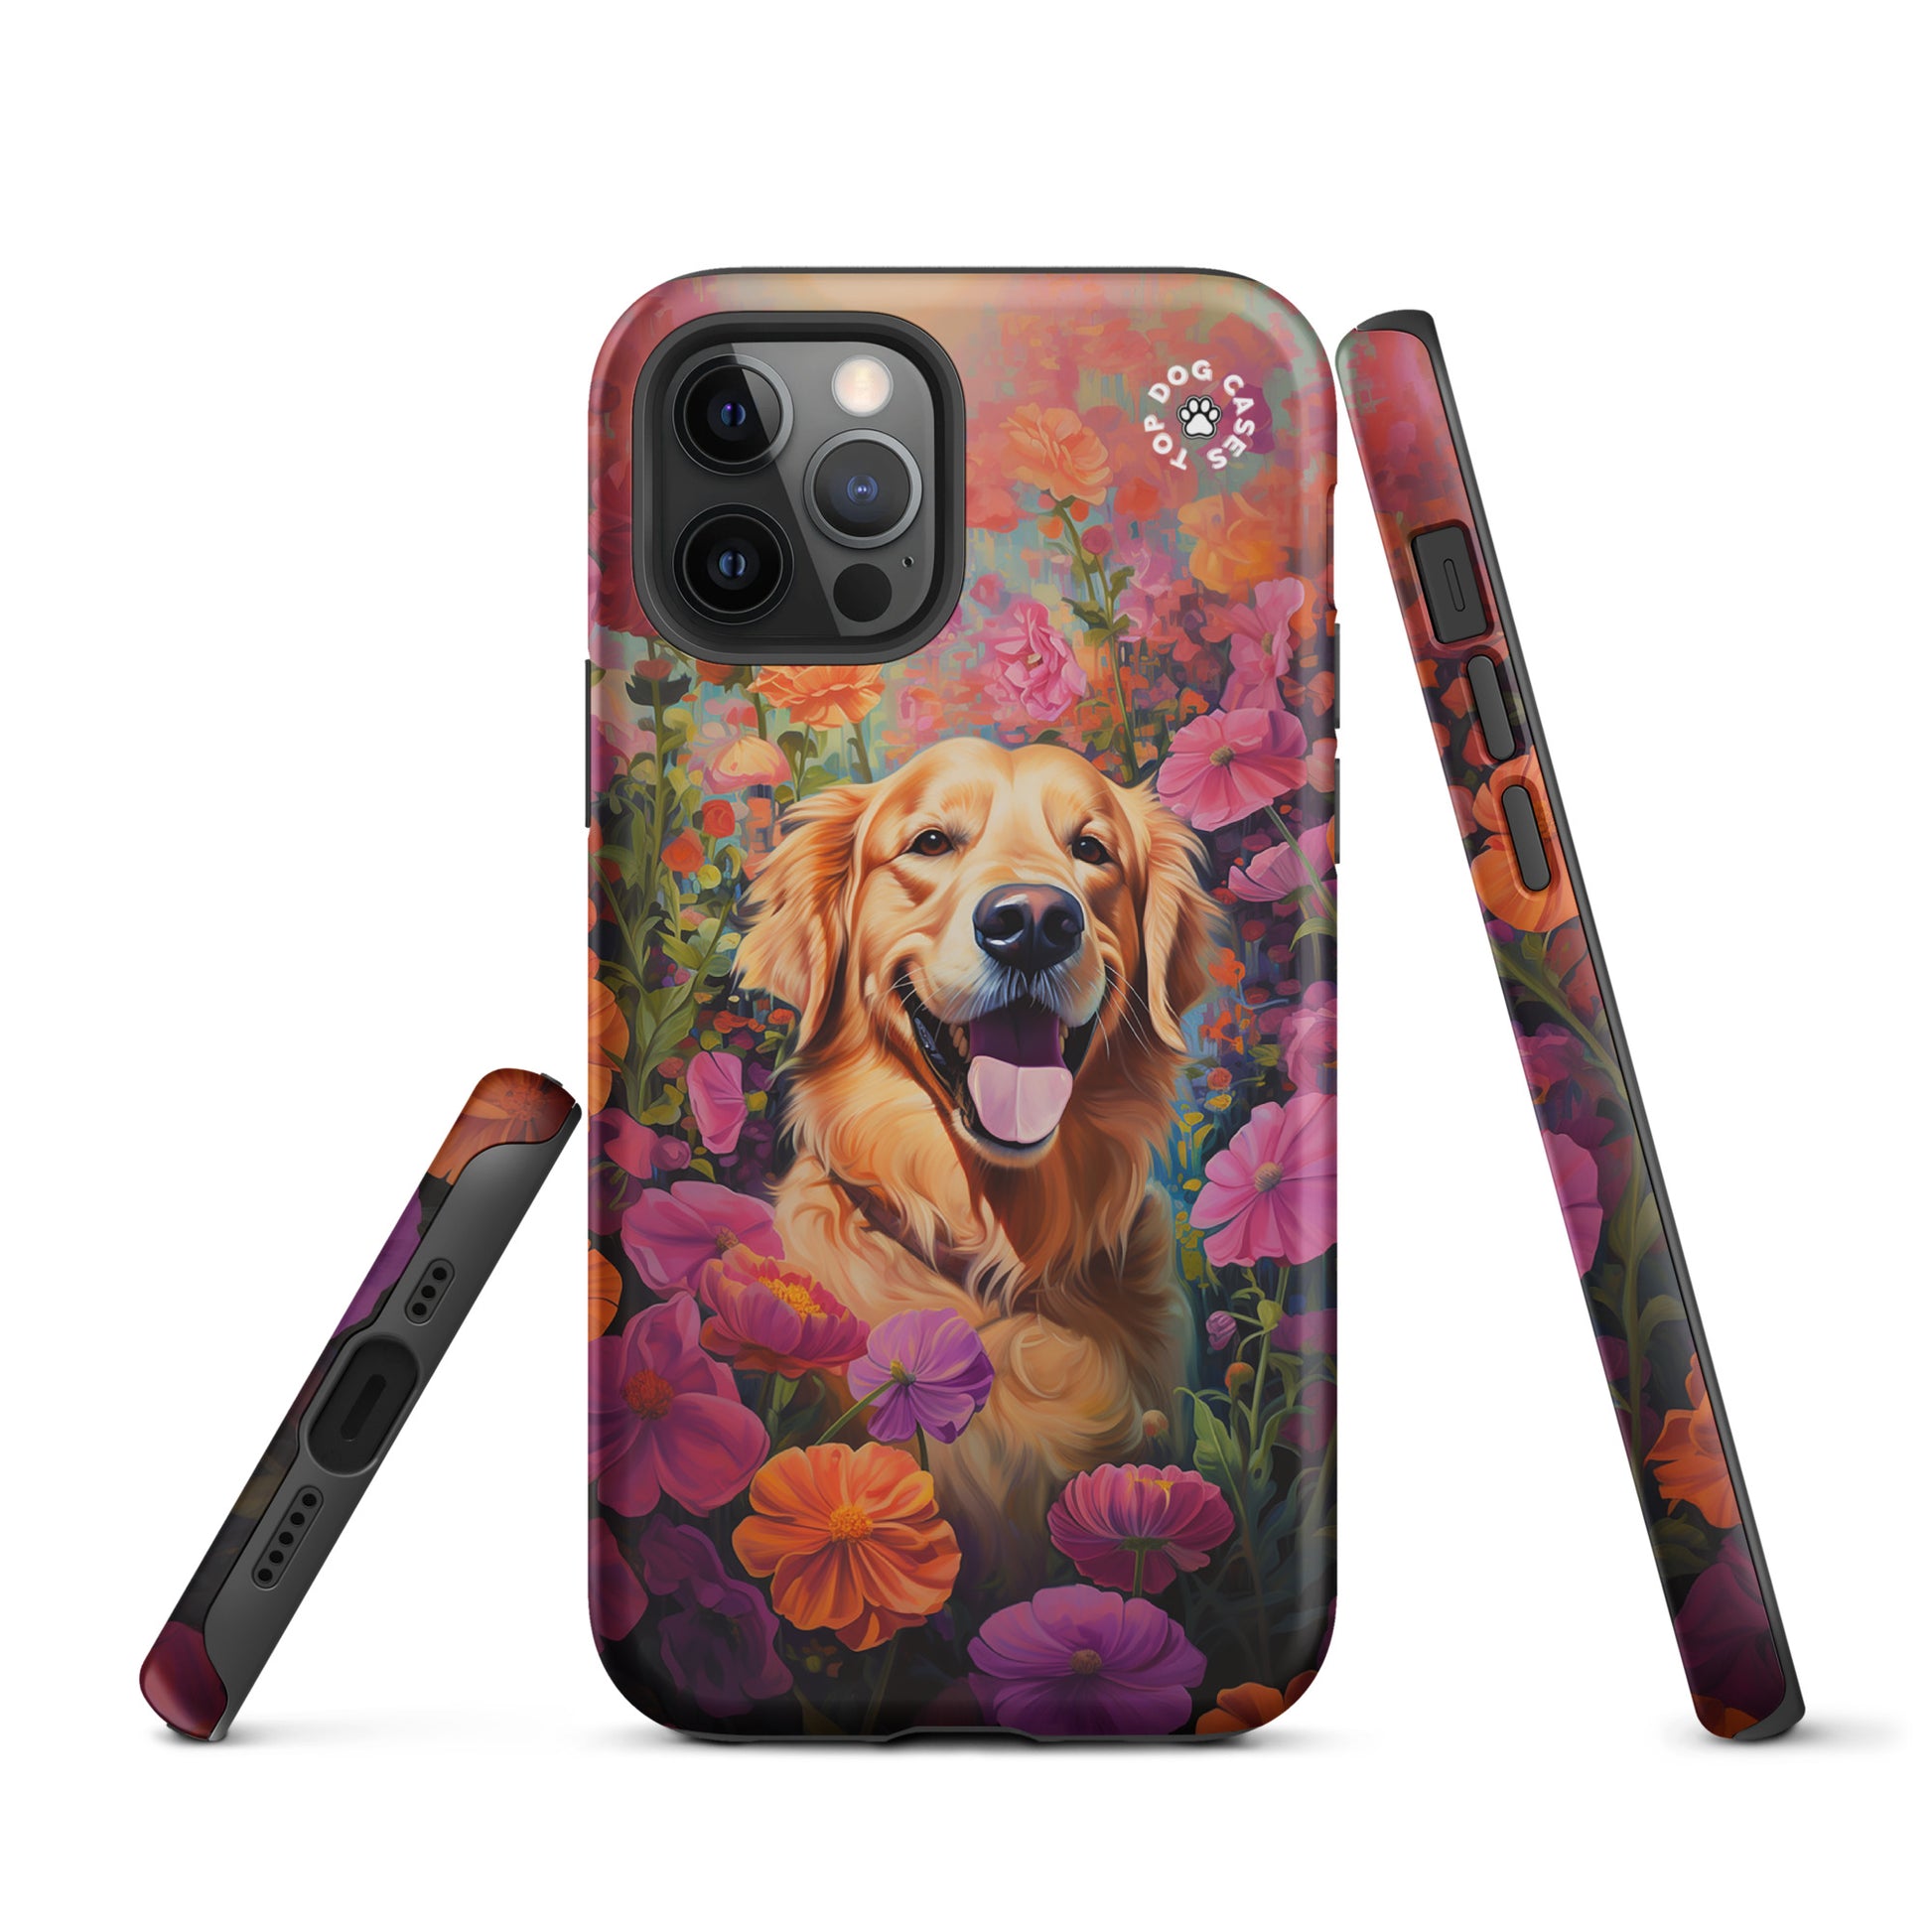 Happy Golden Retriever Around Flowers Tough Case for iPhone - Top Dog Cases - #CuteDog, #CuteDogs, #DogsAndFlowers, #Golden Retriever, #GoldenRetrieverCase, #HappyDog, #iPhone, #iPhone11, #iphone11case, #iPhone12, #iPhone12case, #iPhone13, #iPhone13case, #iPhone13DogCase, #iPhone13Mini, #iPhone13Pro, #iPhone13ProMax, #iPhone14, #iPhone14case, #iPhone14DogCase, #iPhone14Plus, #iPhone14Pluscase, #iPhone14Pro, #iPhone14ProMax, #iPhone14ProMaxCase, #iPhone15, #iPhone15case, #iPhonecase, #iphonedogcase